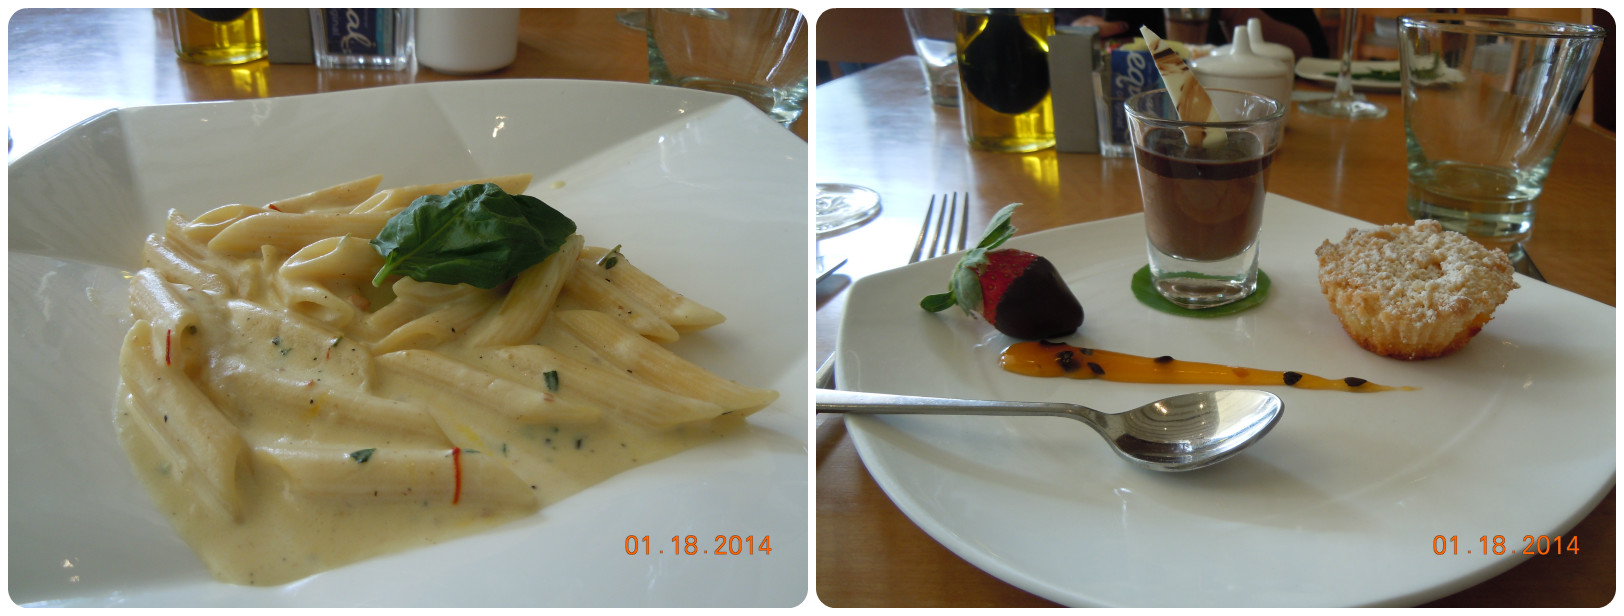 Awesome pasta with saffron and cream sauce and the yummiest desserts ever